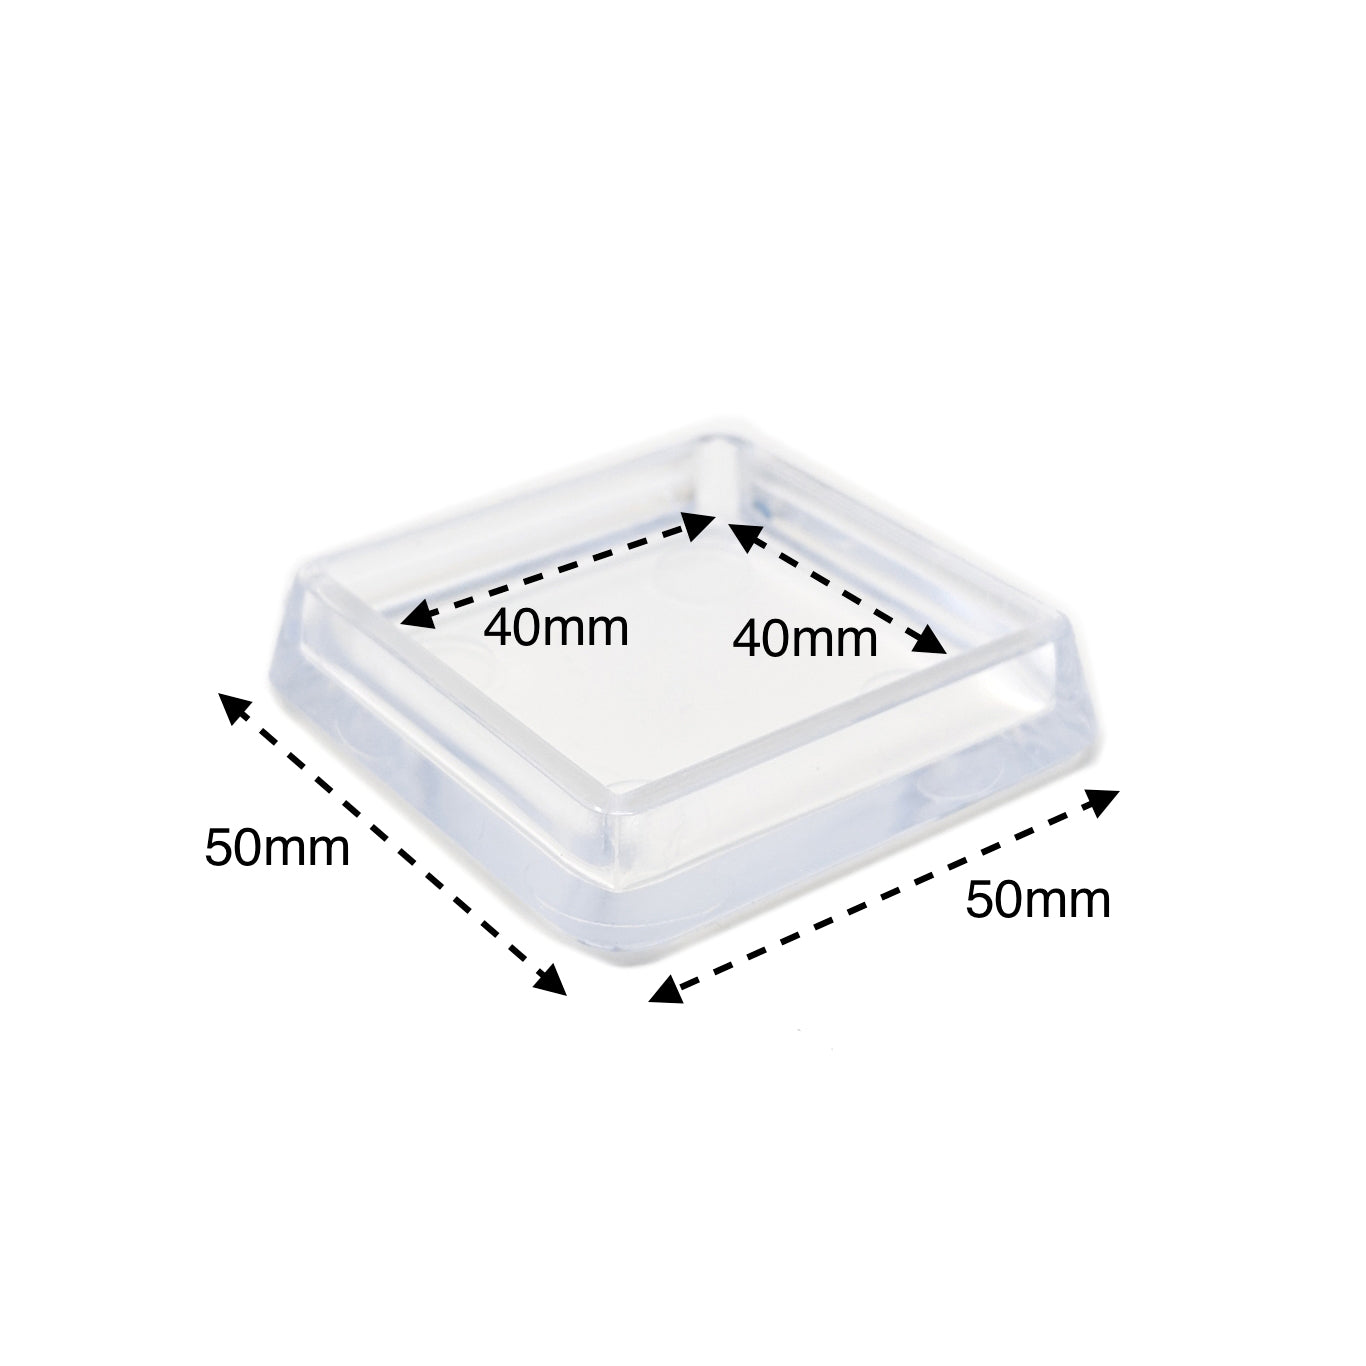 40x40mm Clear Square Furniture Leg Cups Floor Carpet Protector - Made in Germany - Keay Vital Parts